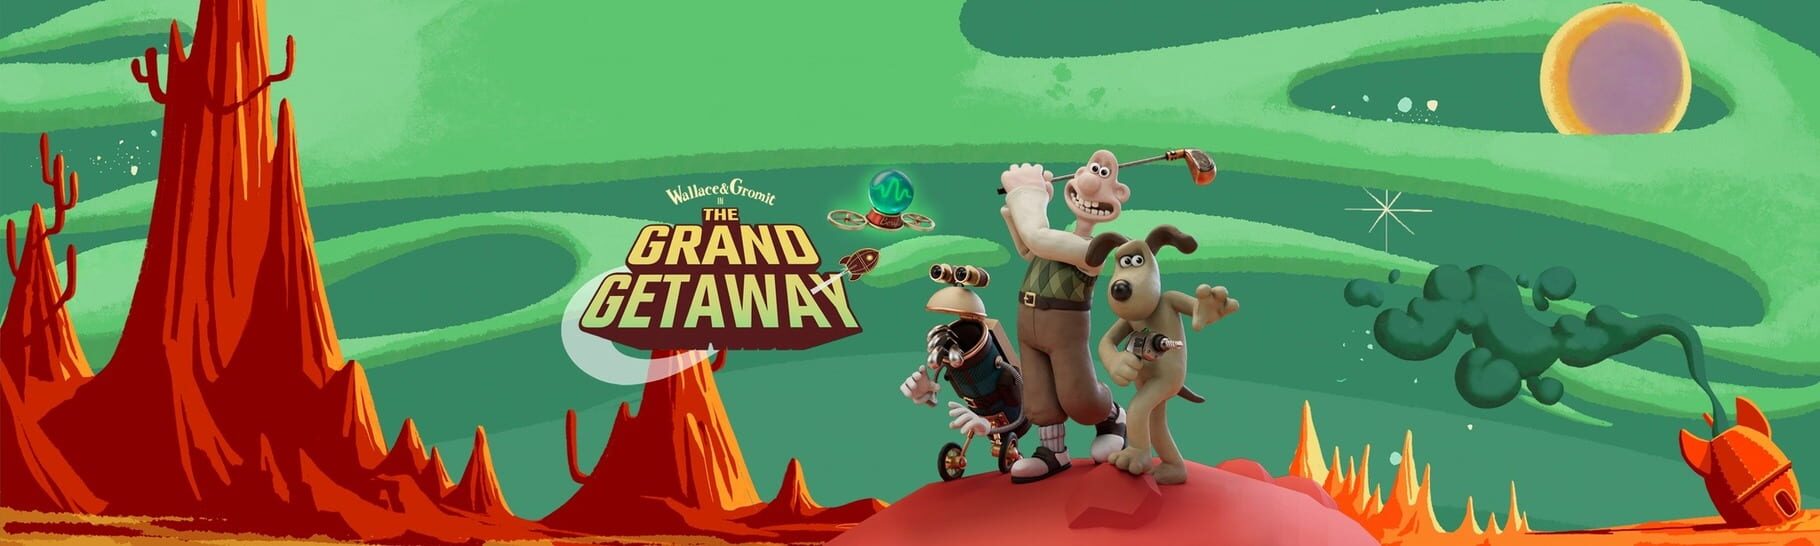 Wallace & Gromit: The Grand Getaway Image